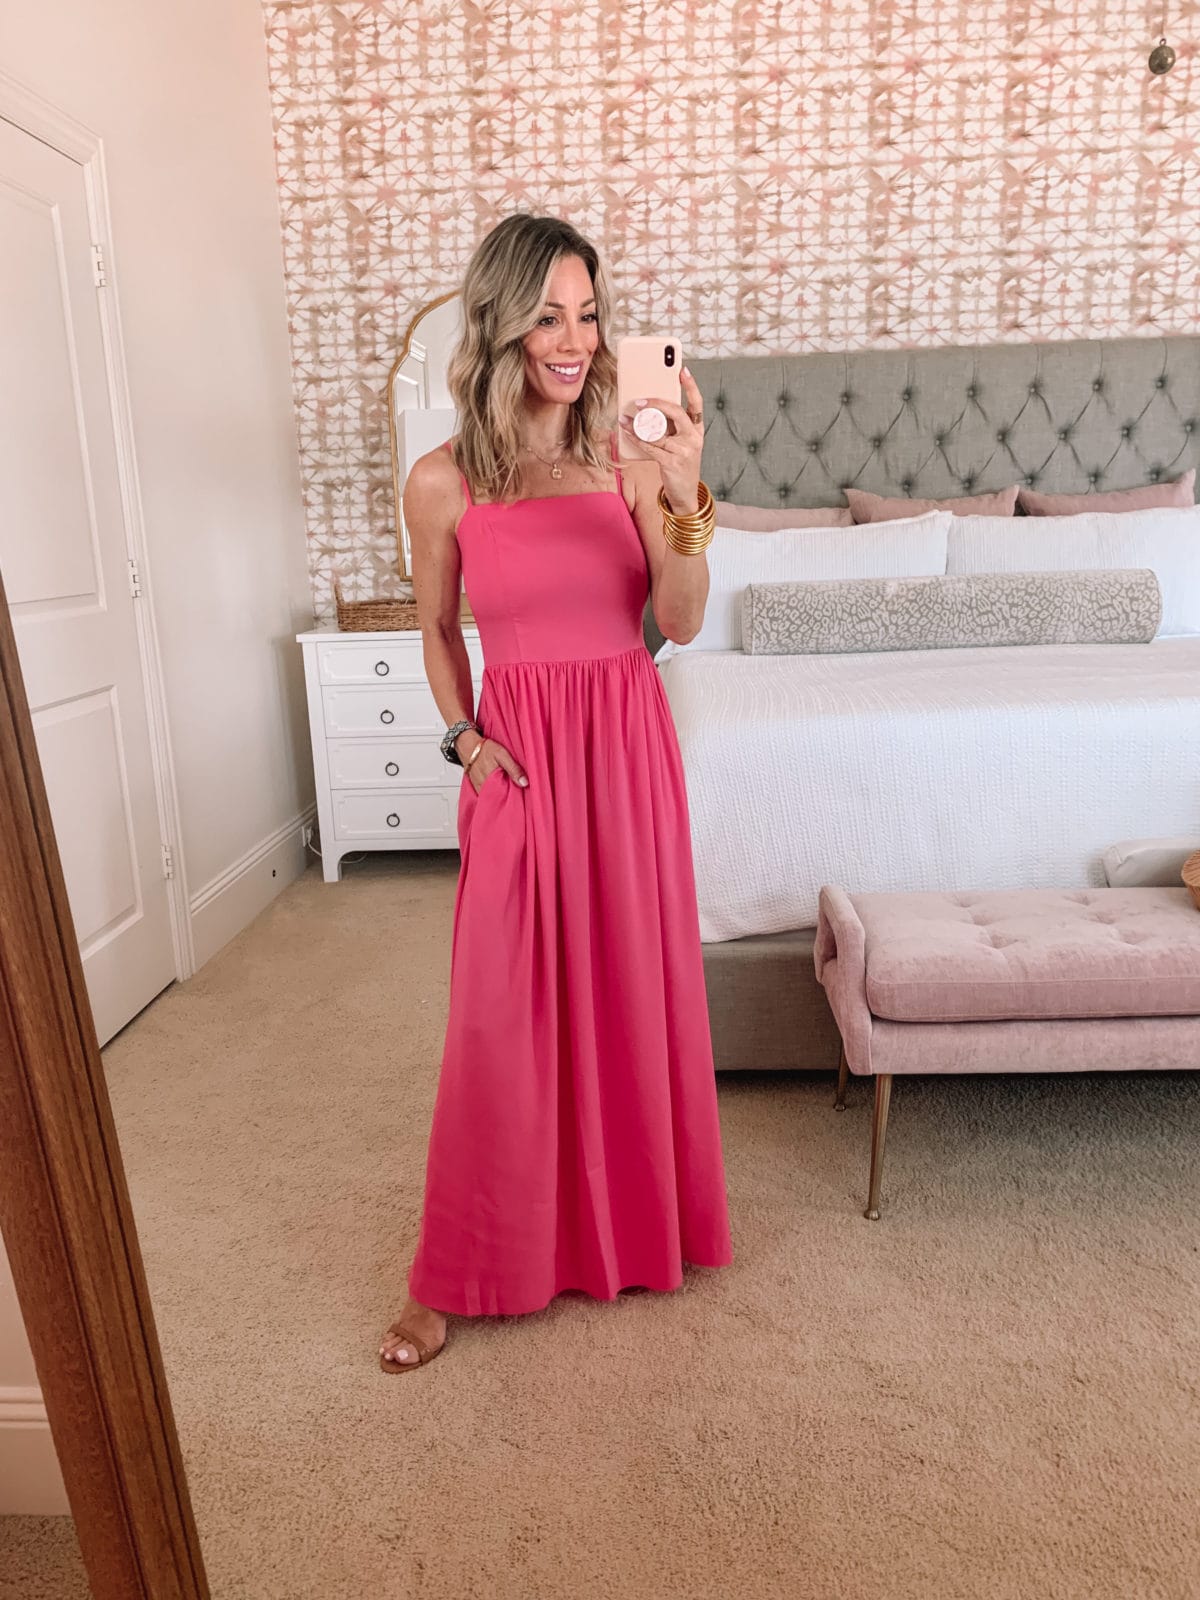 Amazon Fashion Faves, Pink Maxi Dress with Sandals